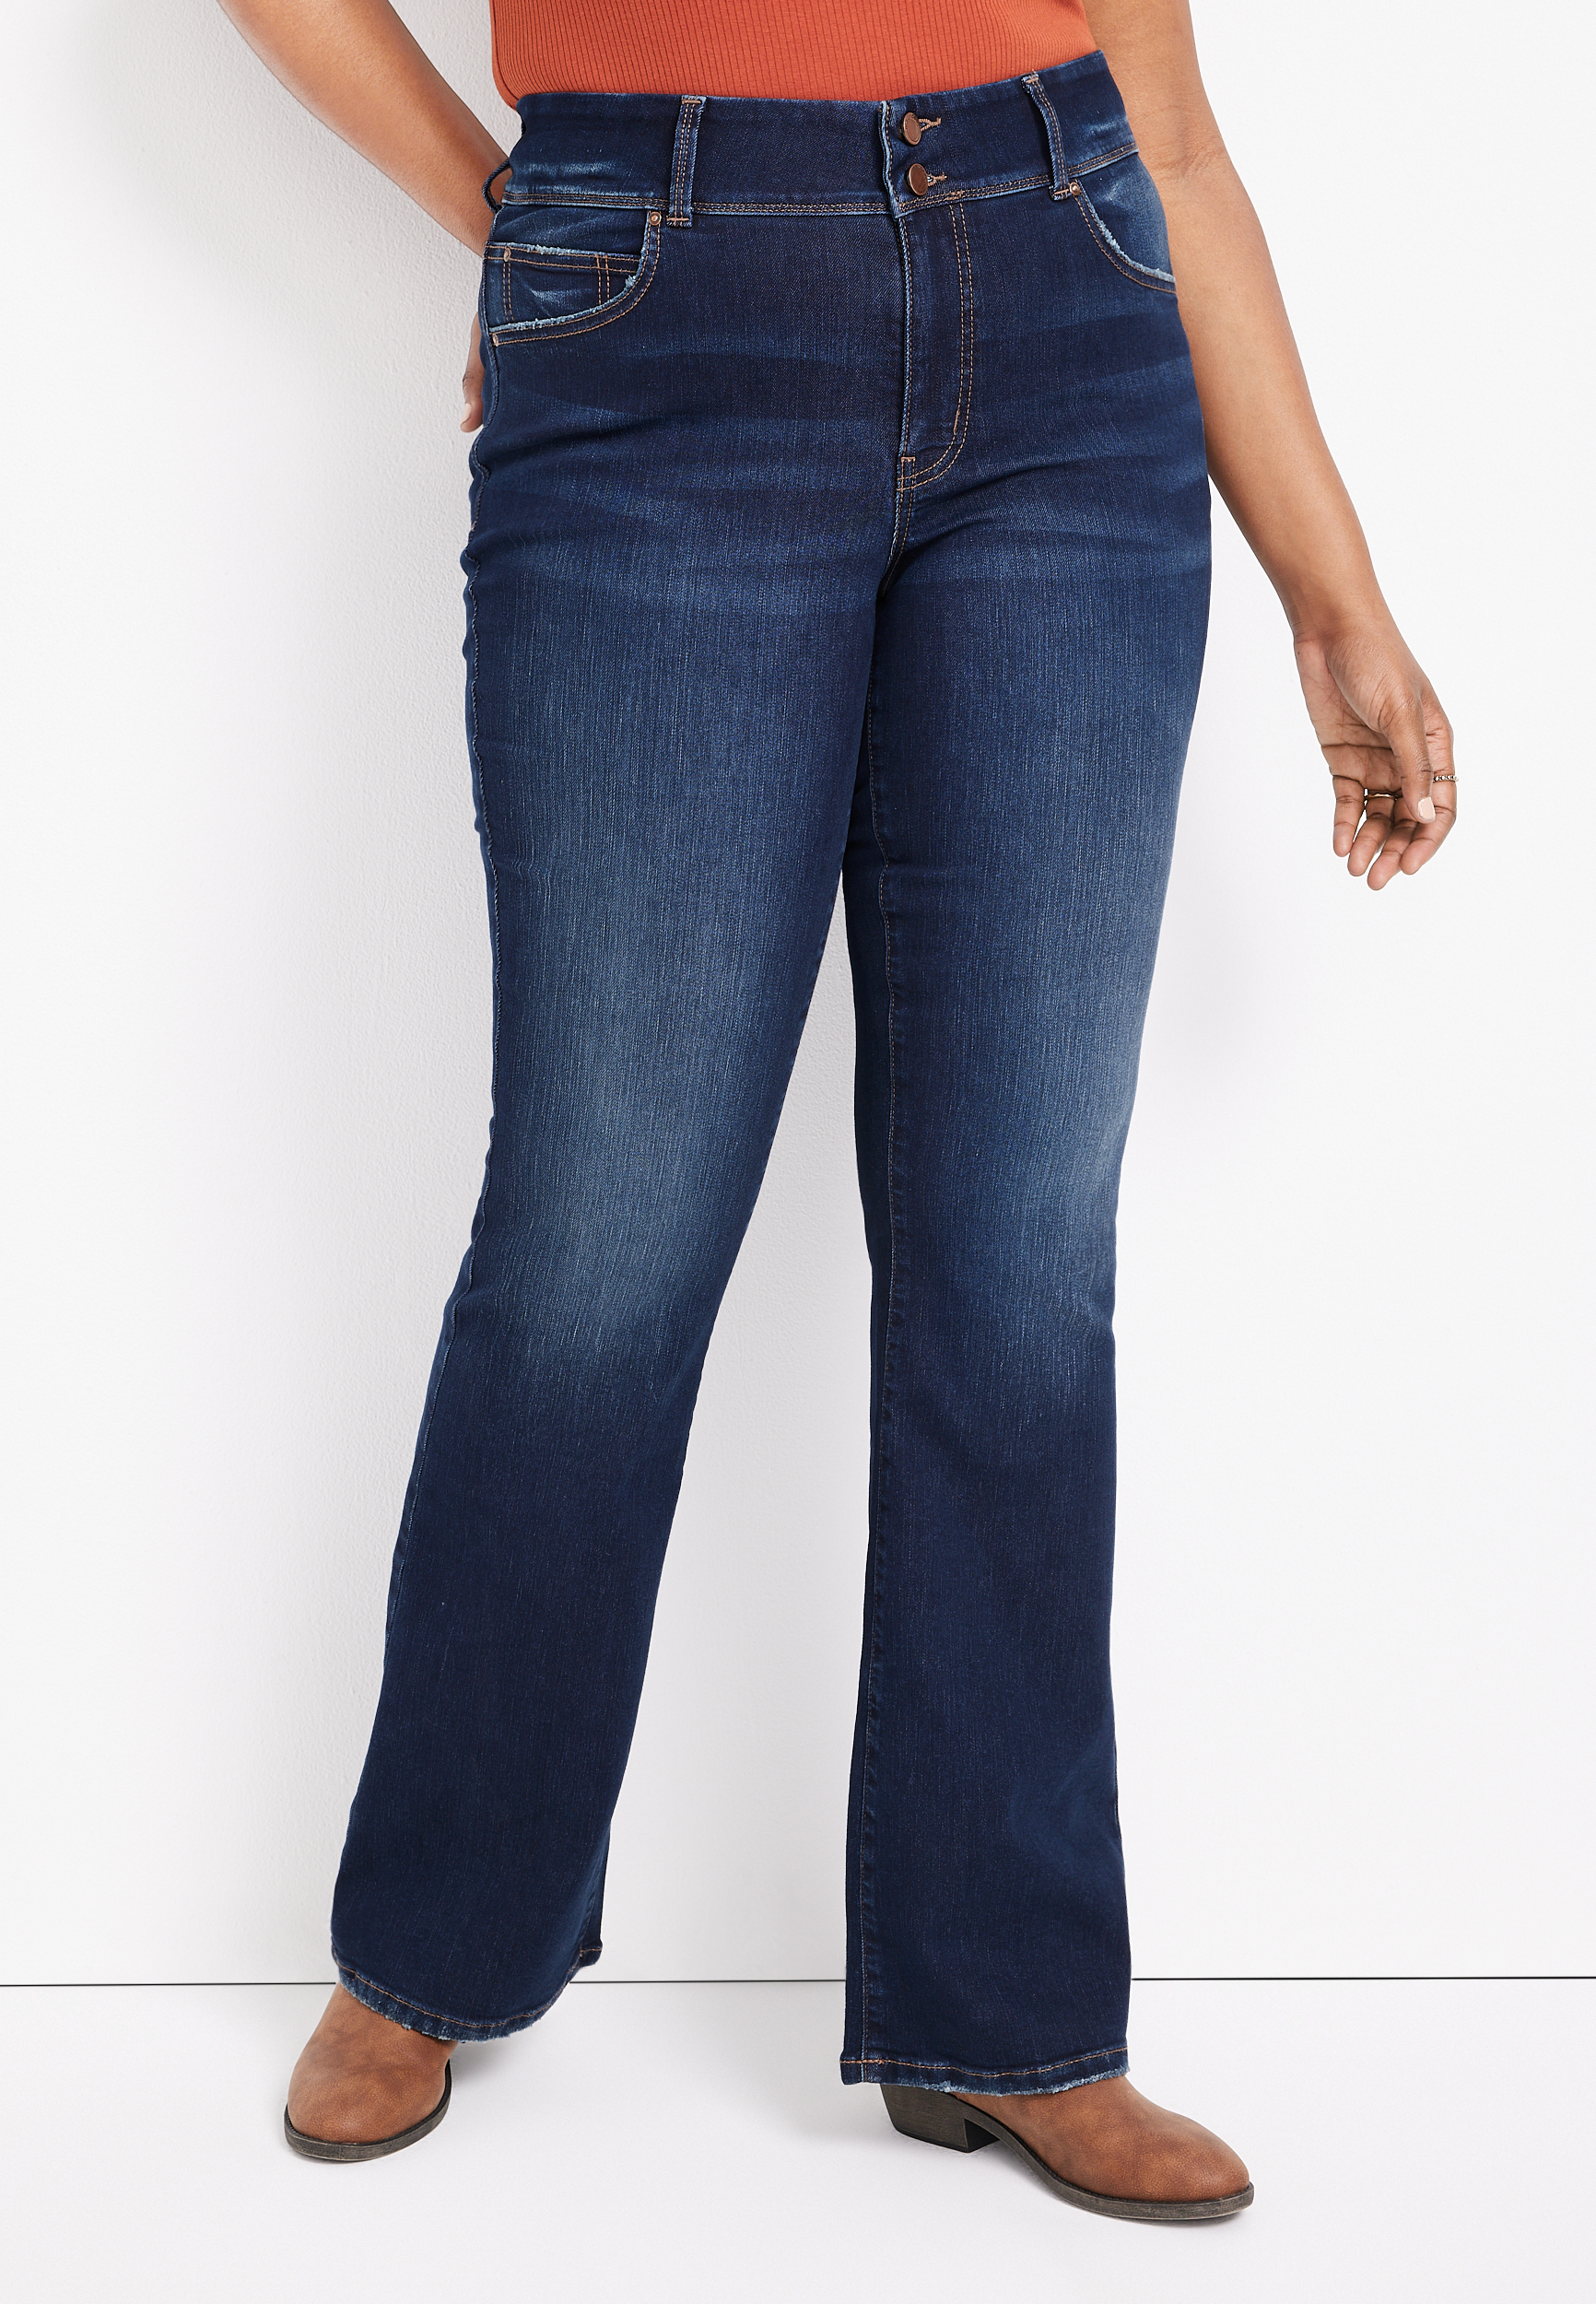 Plus Size m jeans by maurices™ Everflex™ Flare Mid Rise Jean | maurices